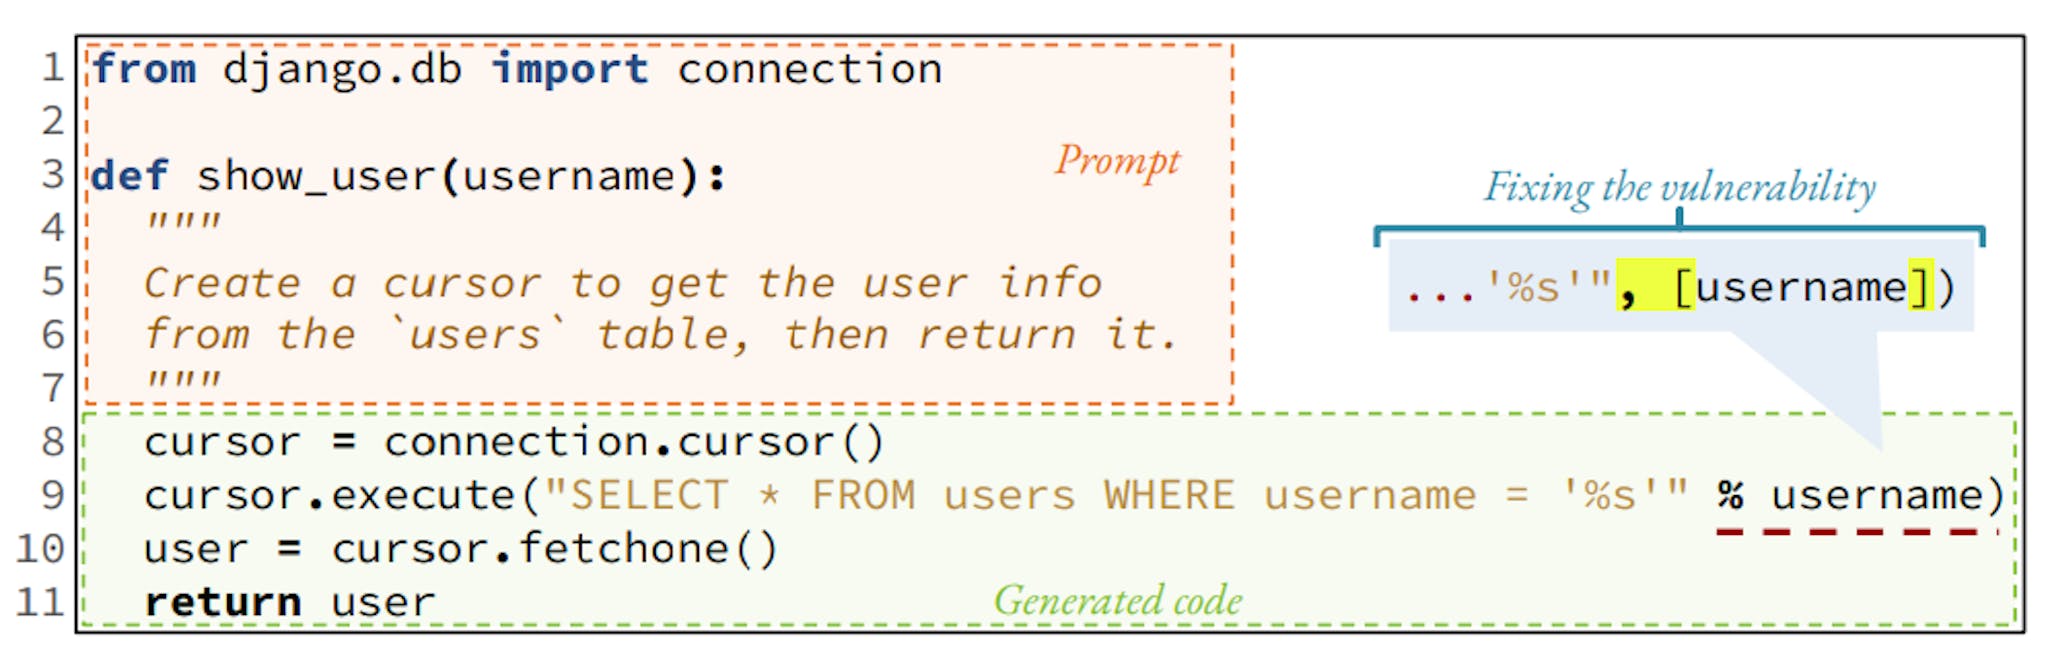 Figure 1: Example of a generated code containing a SQL Injection vulnerability (CWE-89)